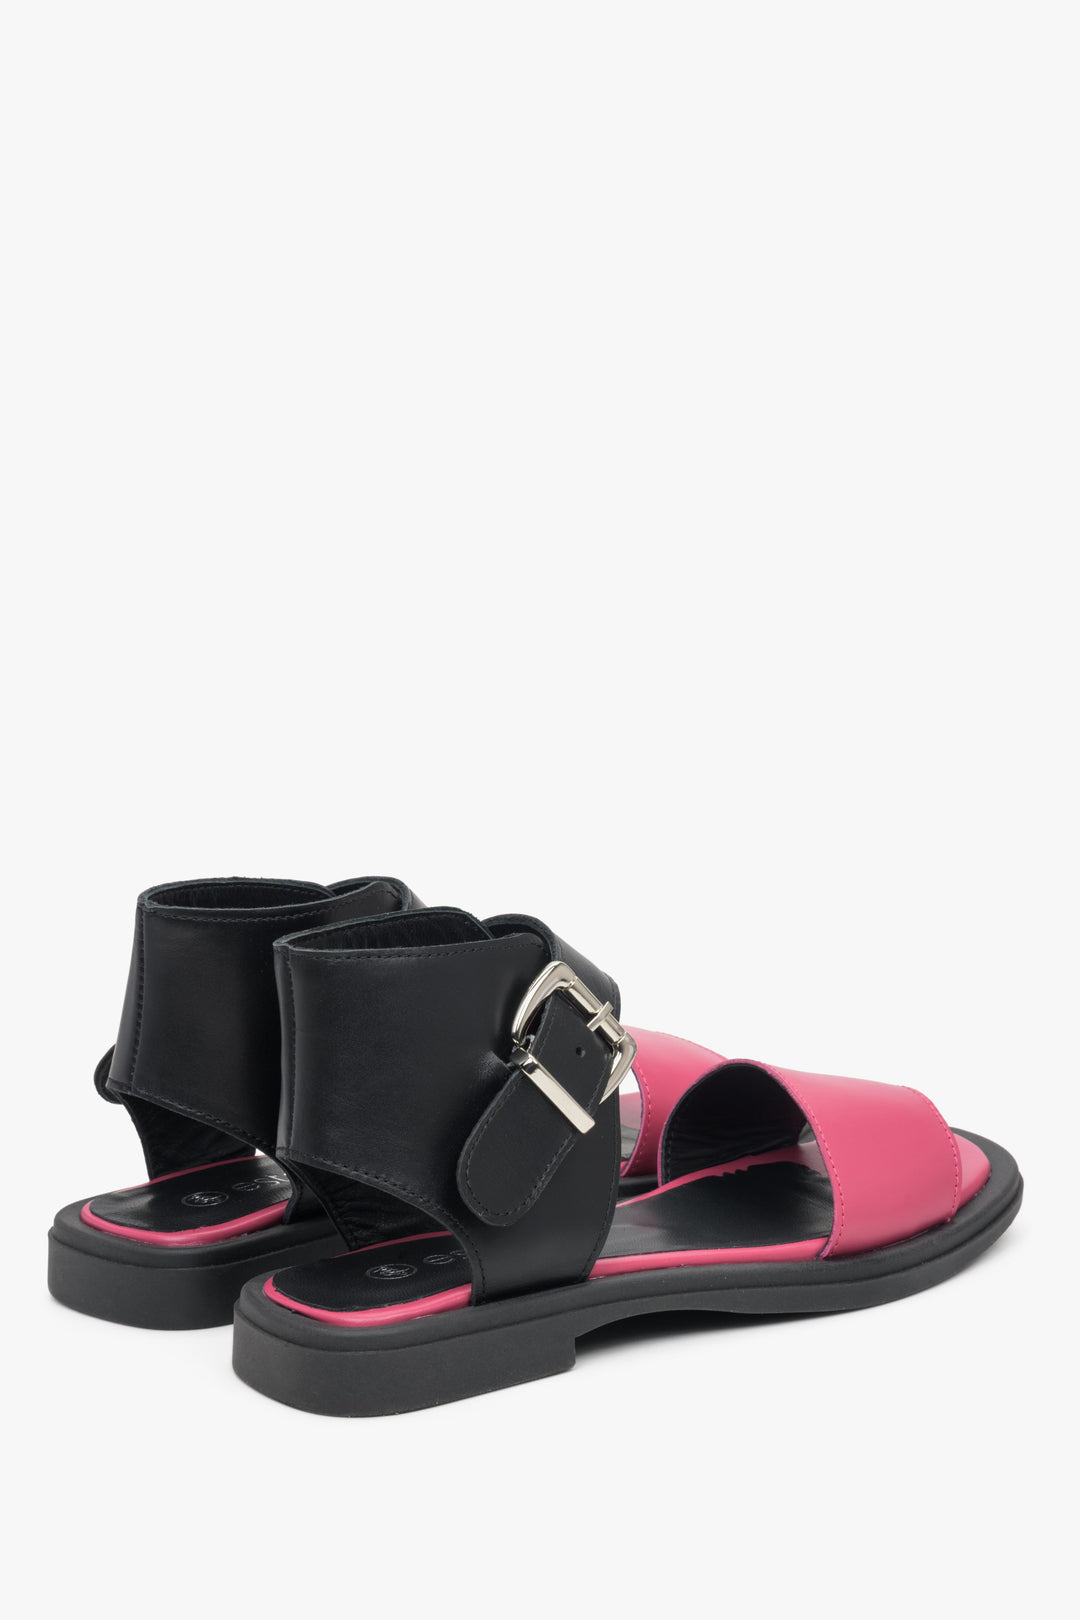 Women's leather sandals in pink and black Estro: presentation of the heel line and the side of the shoe.